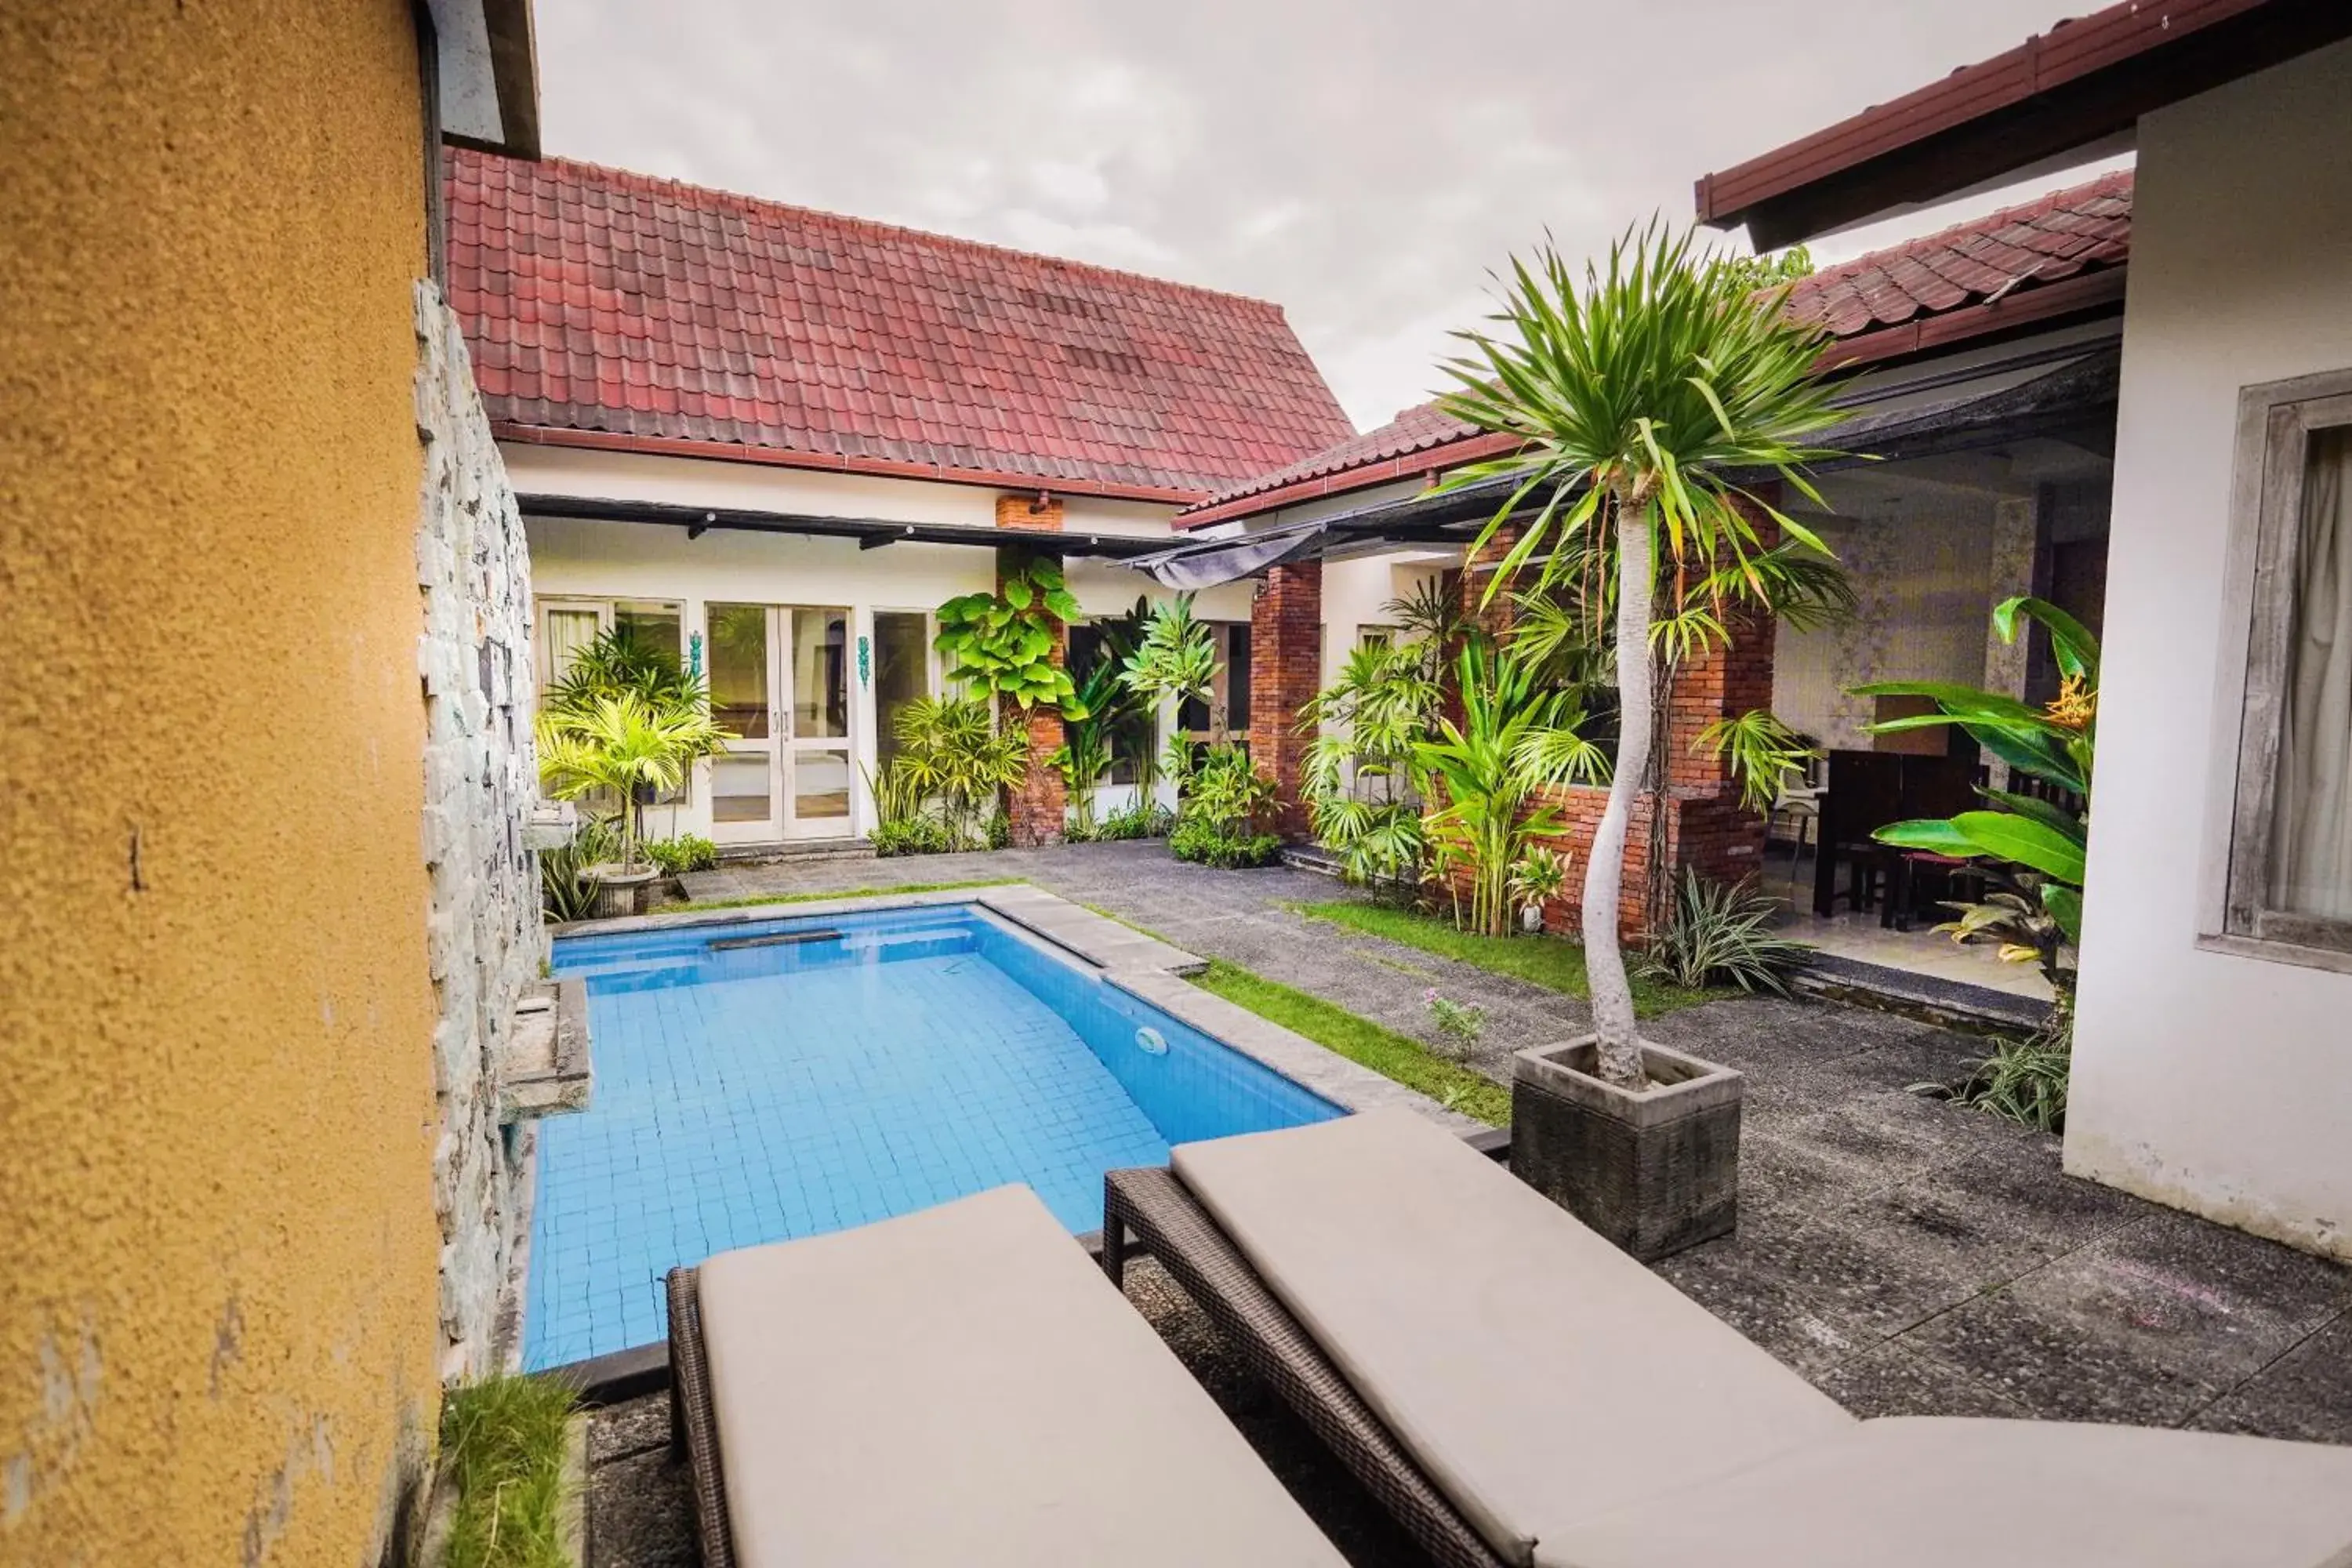 Property building, Swimming Pool in The Janan Villa